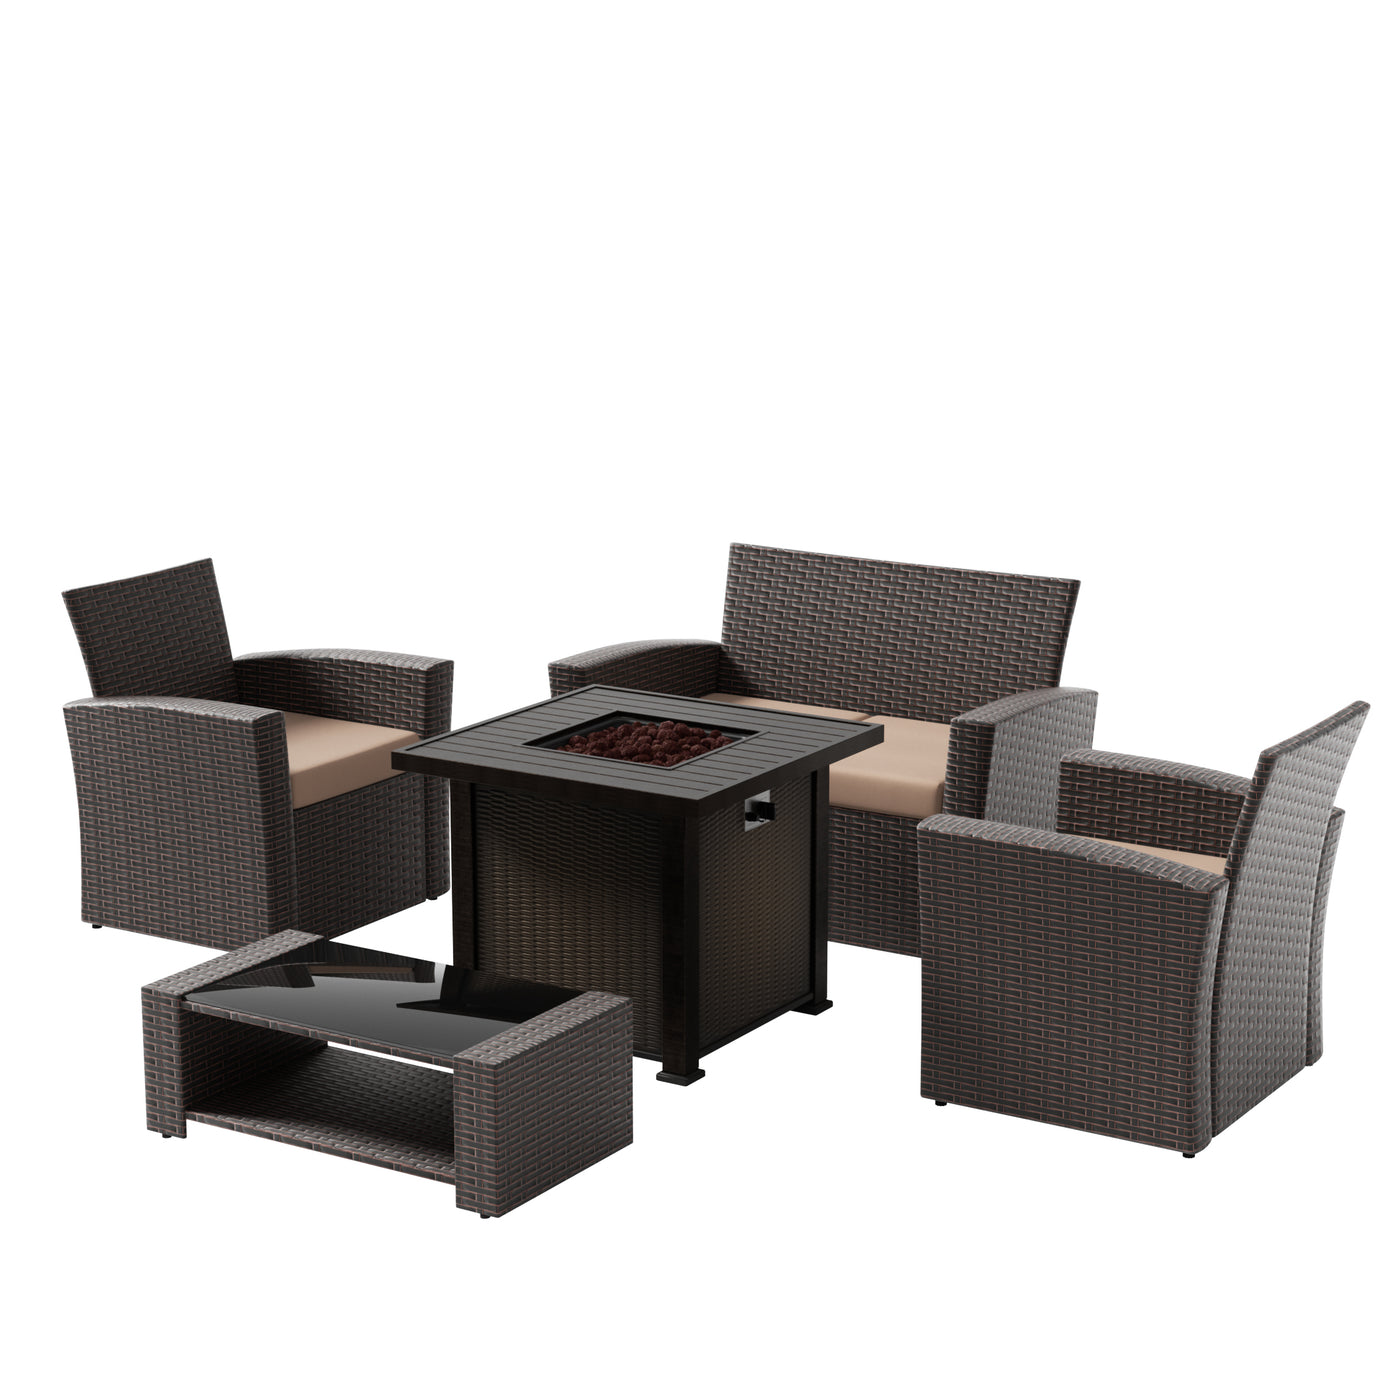 Coastal 4-Piece Chocolate Outdoor Patio Conversation Sofa Set with Square Fire Pit Table